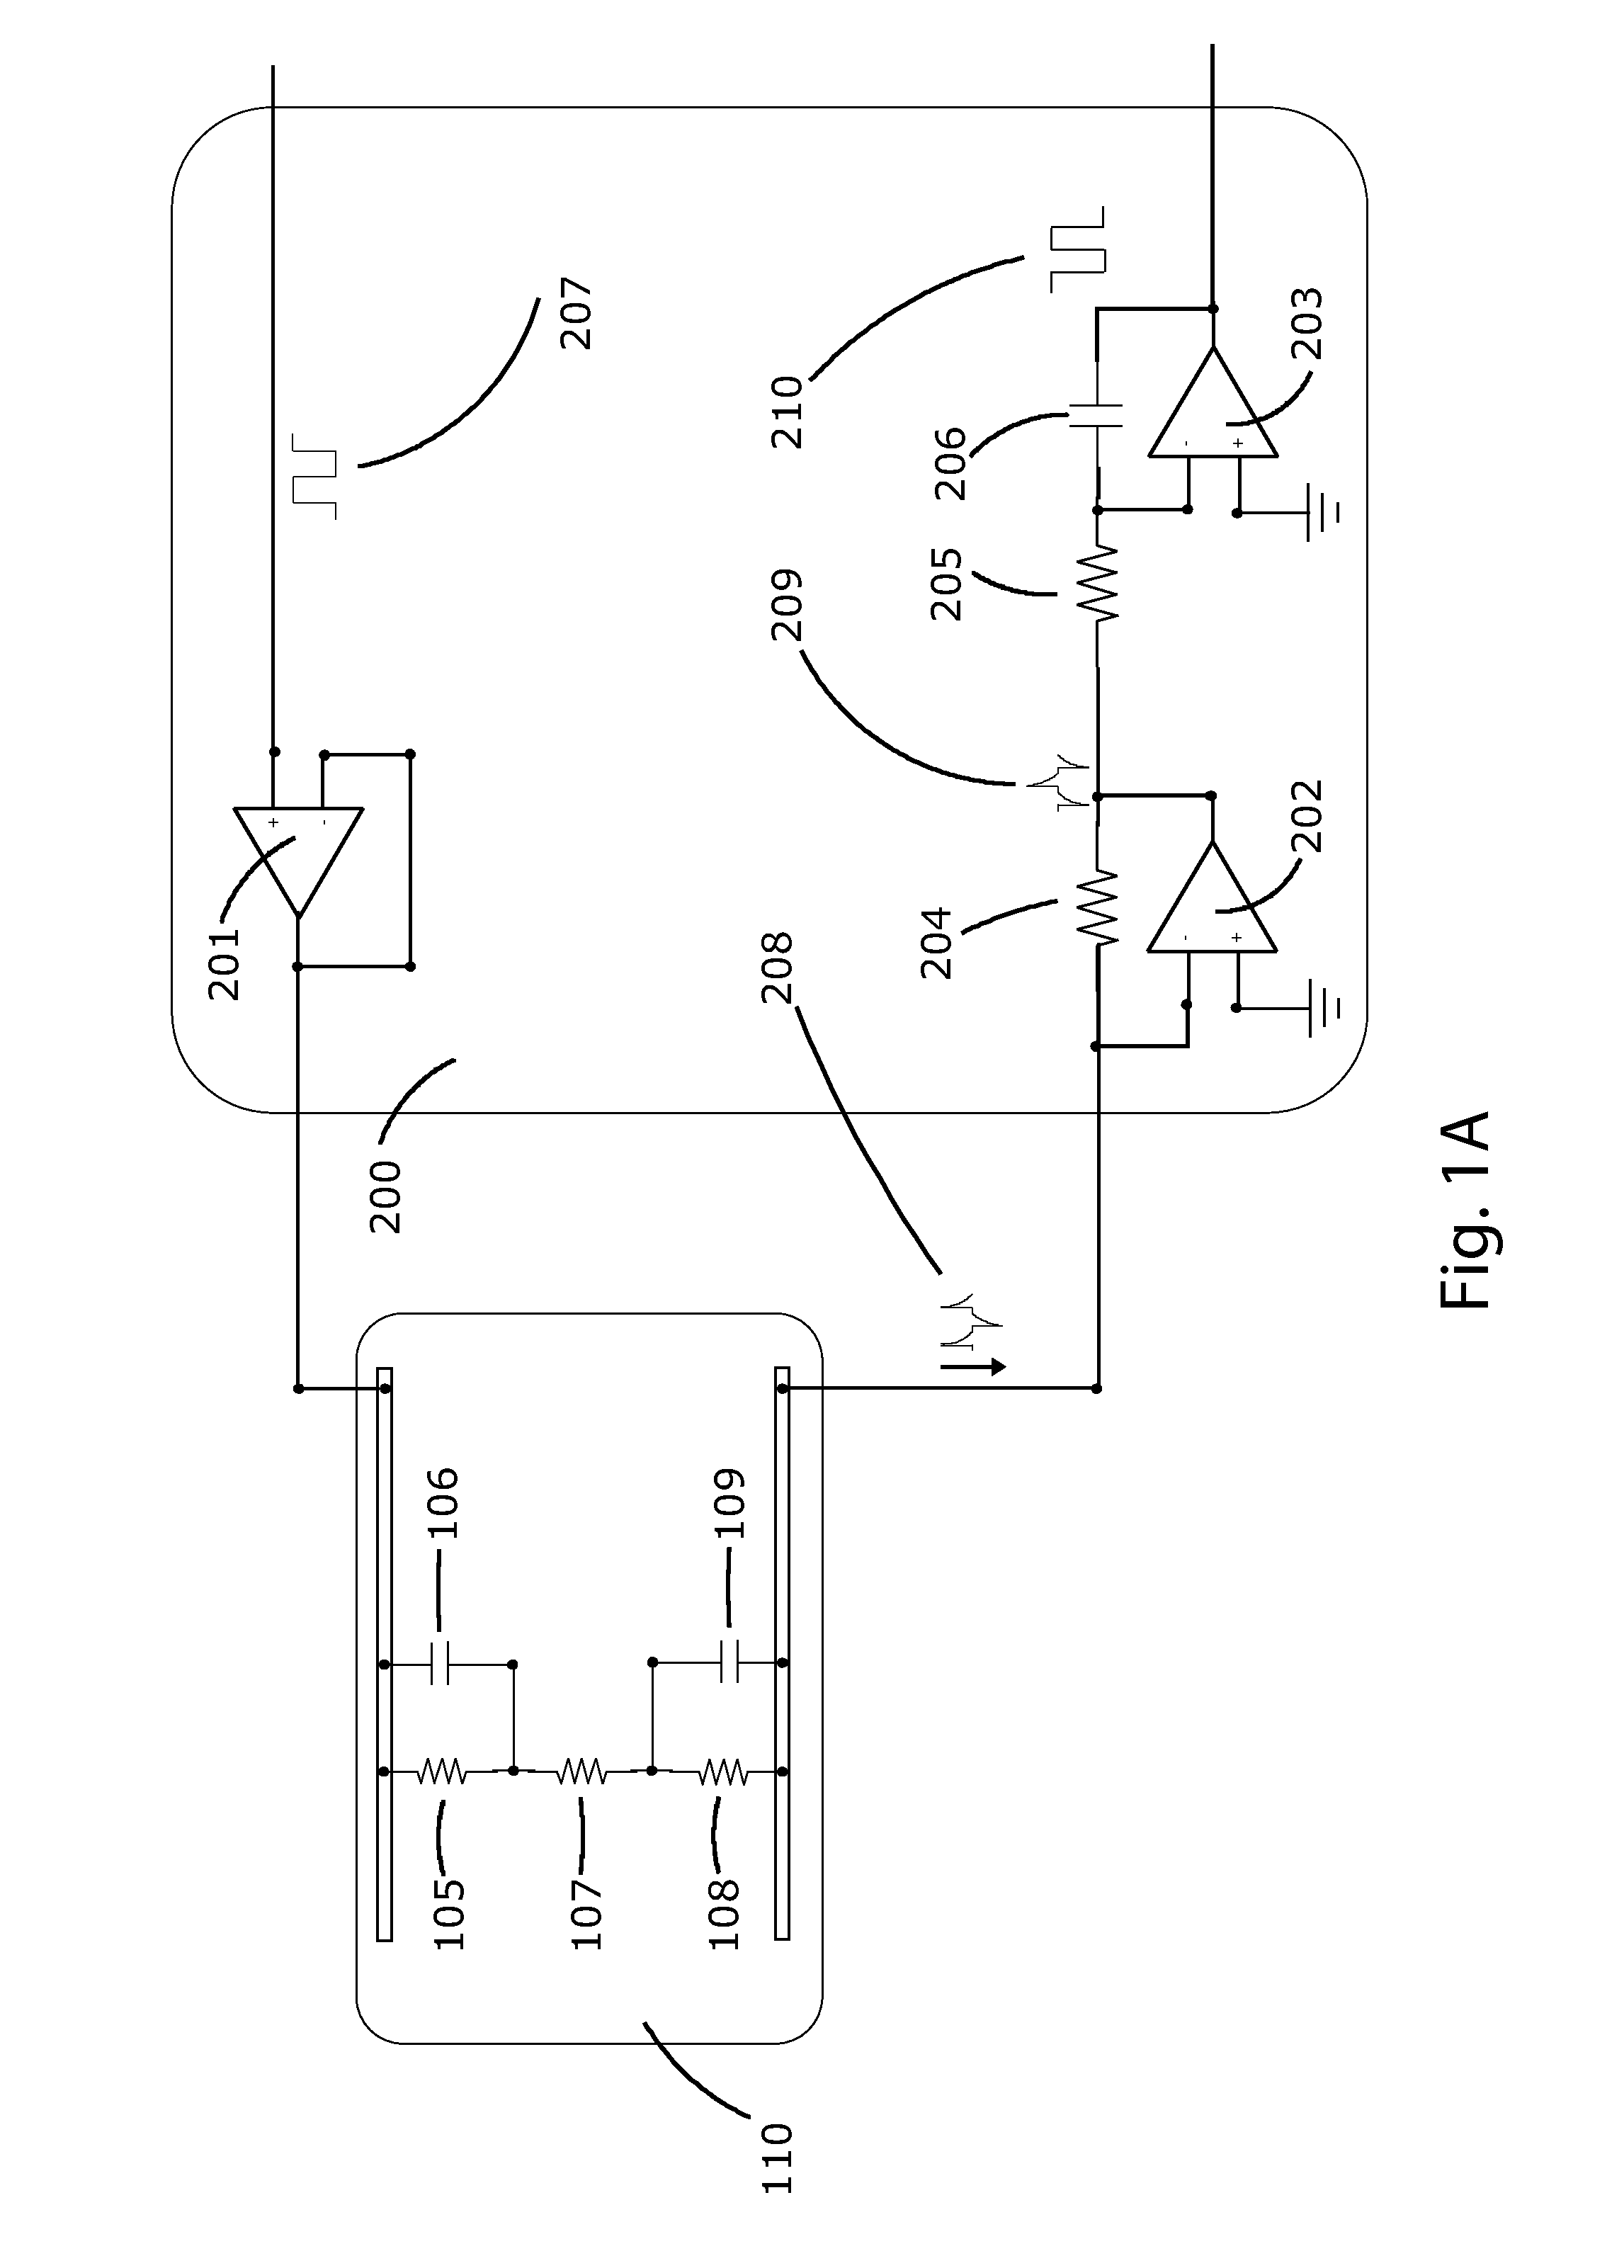 Method and apparatus for detecting and regulating vascular endothelial growth factor (VEGF) by forming a homeostatic loop employing a half-antibody biosensor